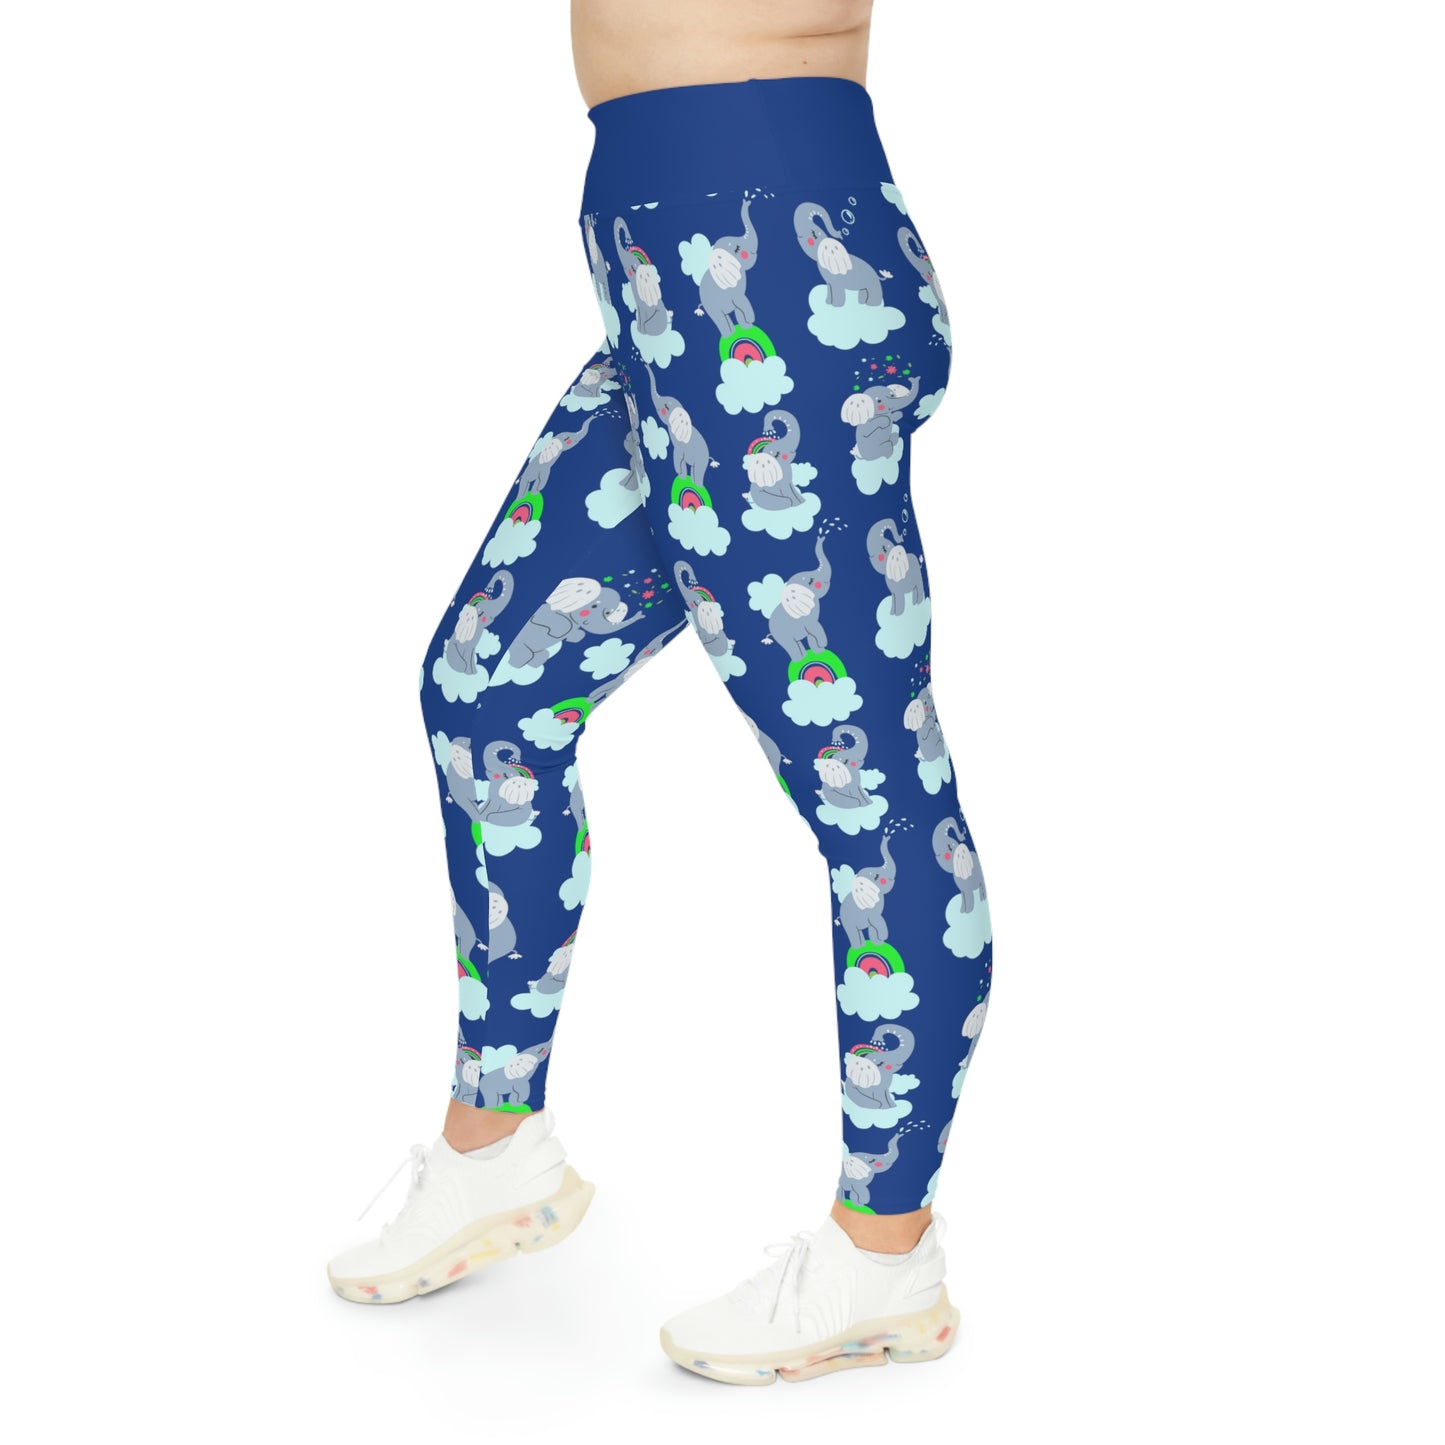 Elephant Plus Size Leggings animal kingdom, One of a Kind Workout Activewear for Wife Fitness, Best Friend, mom and me tights Christmas Gift